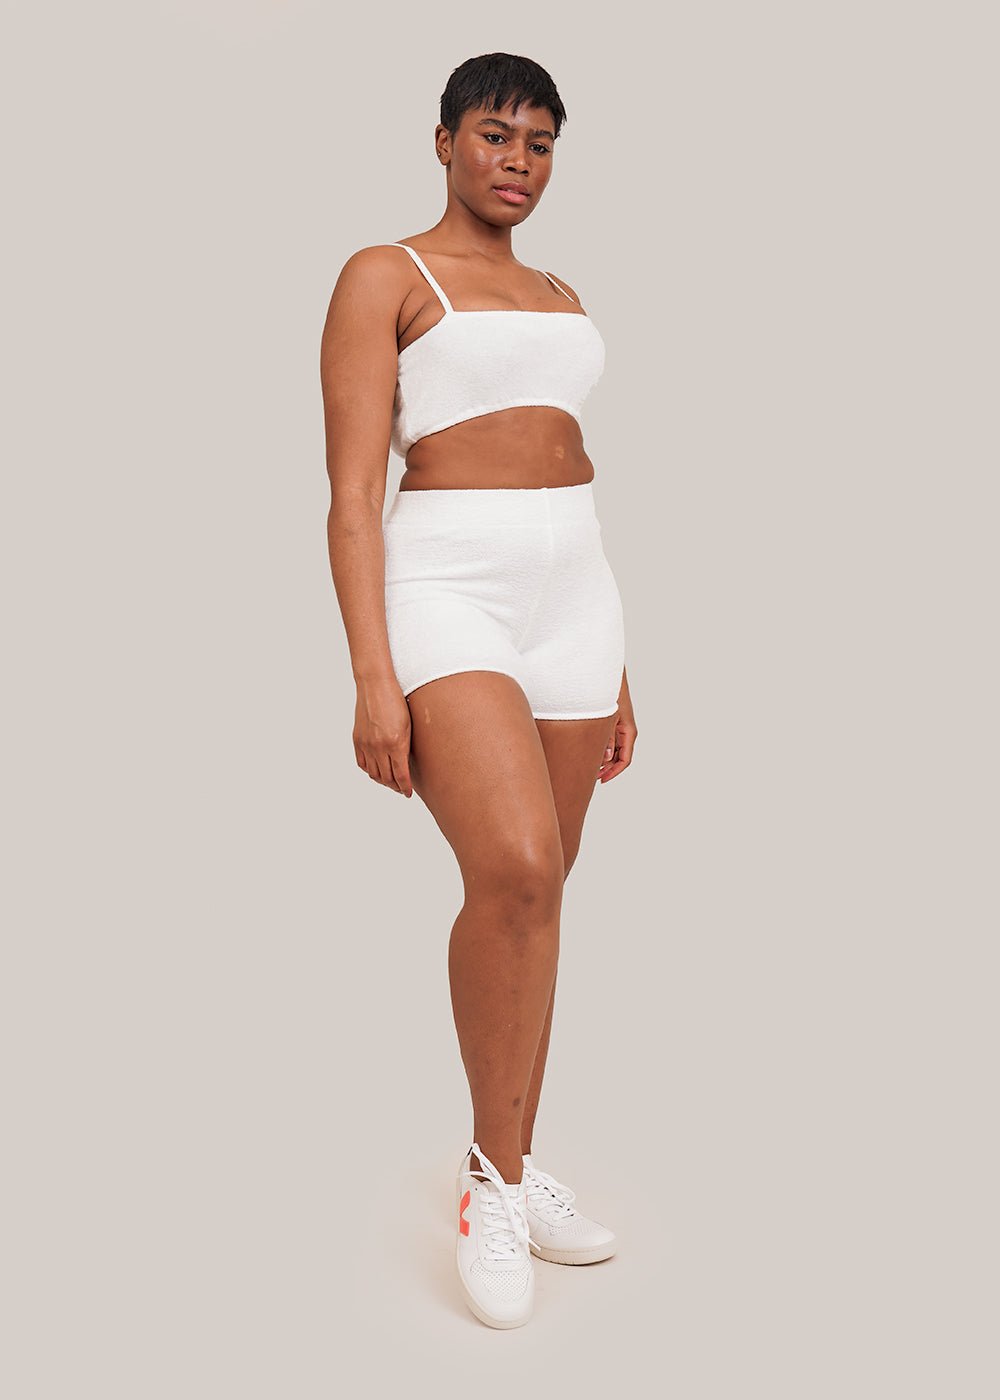 Terry Tank in White by BUCI – New Classics Studios